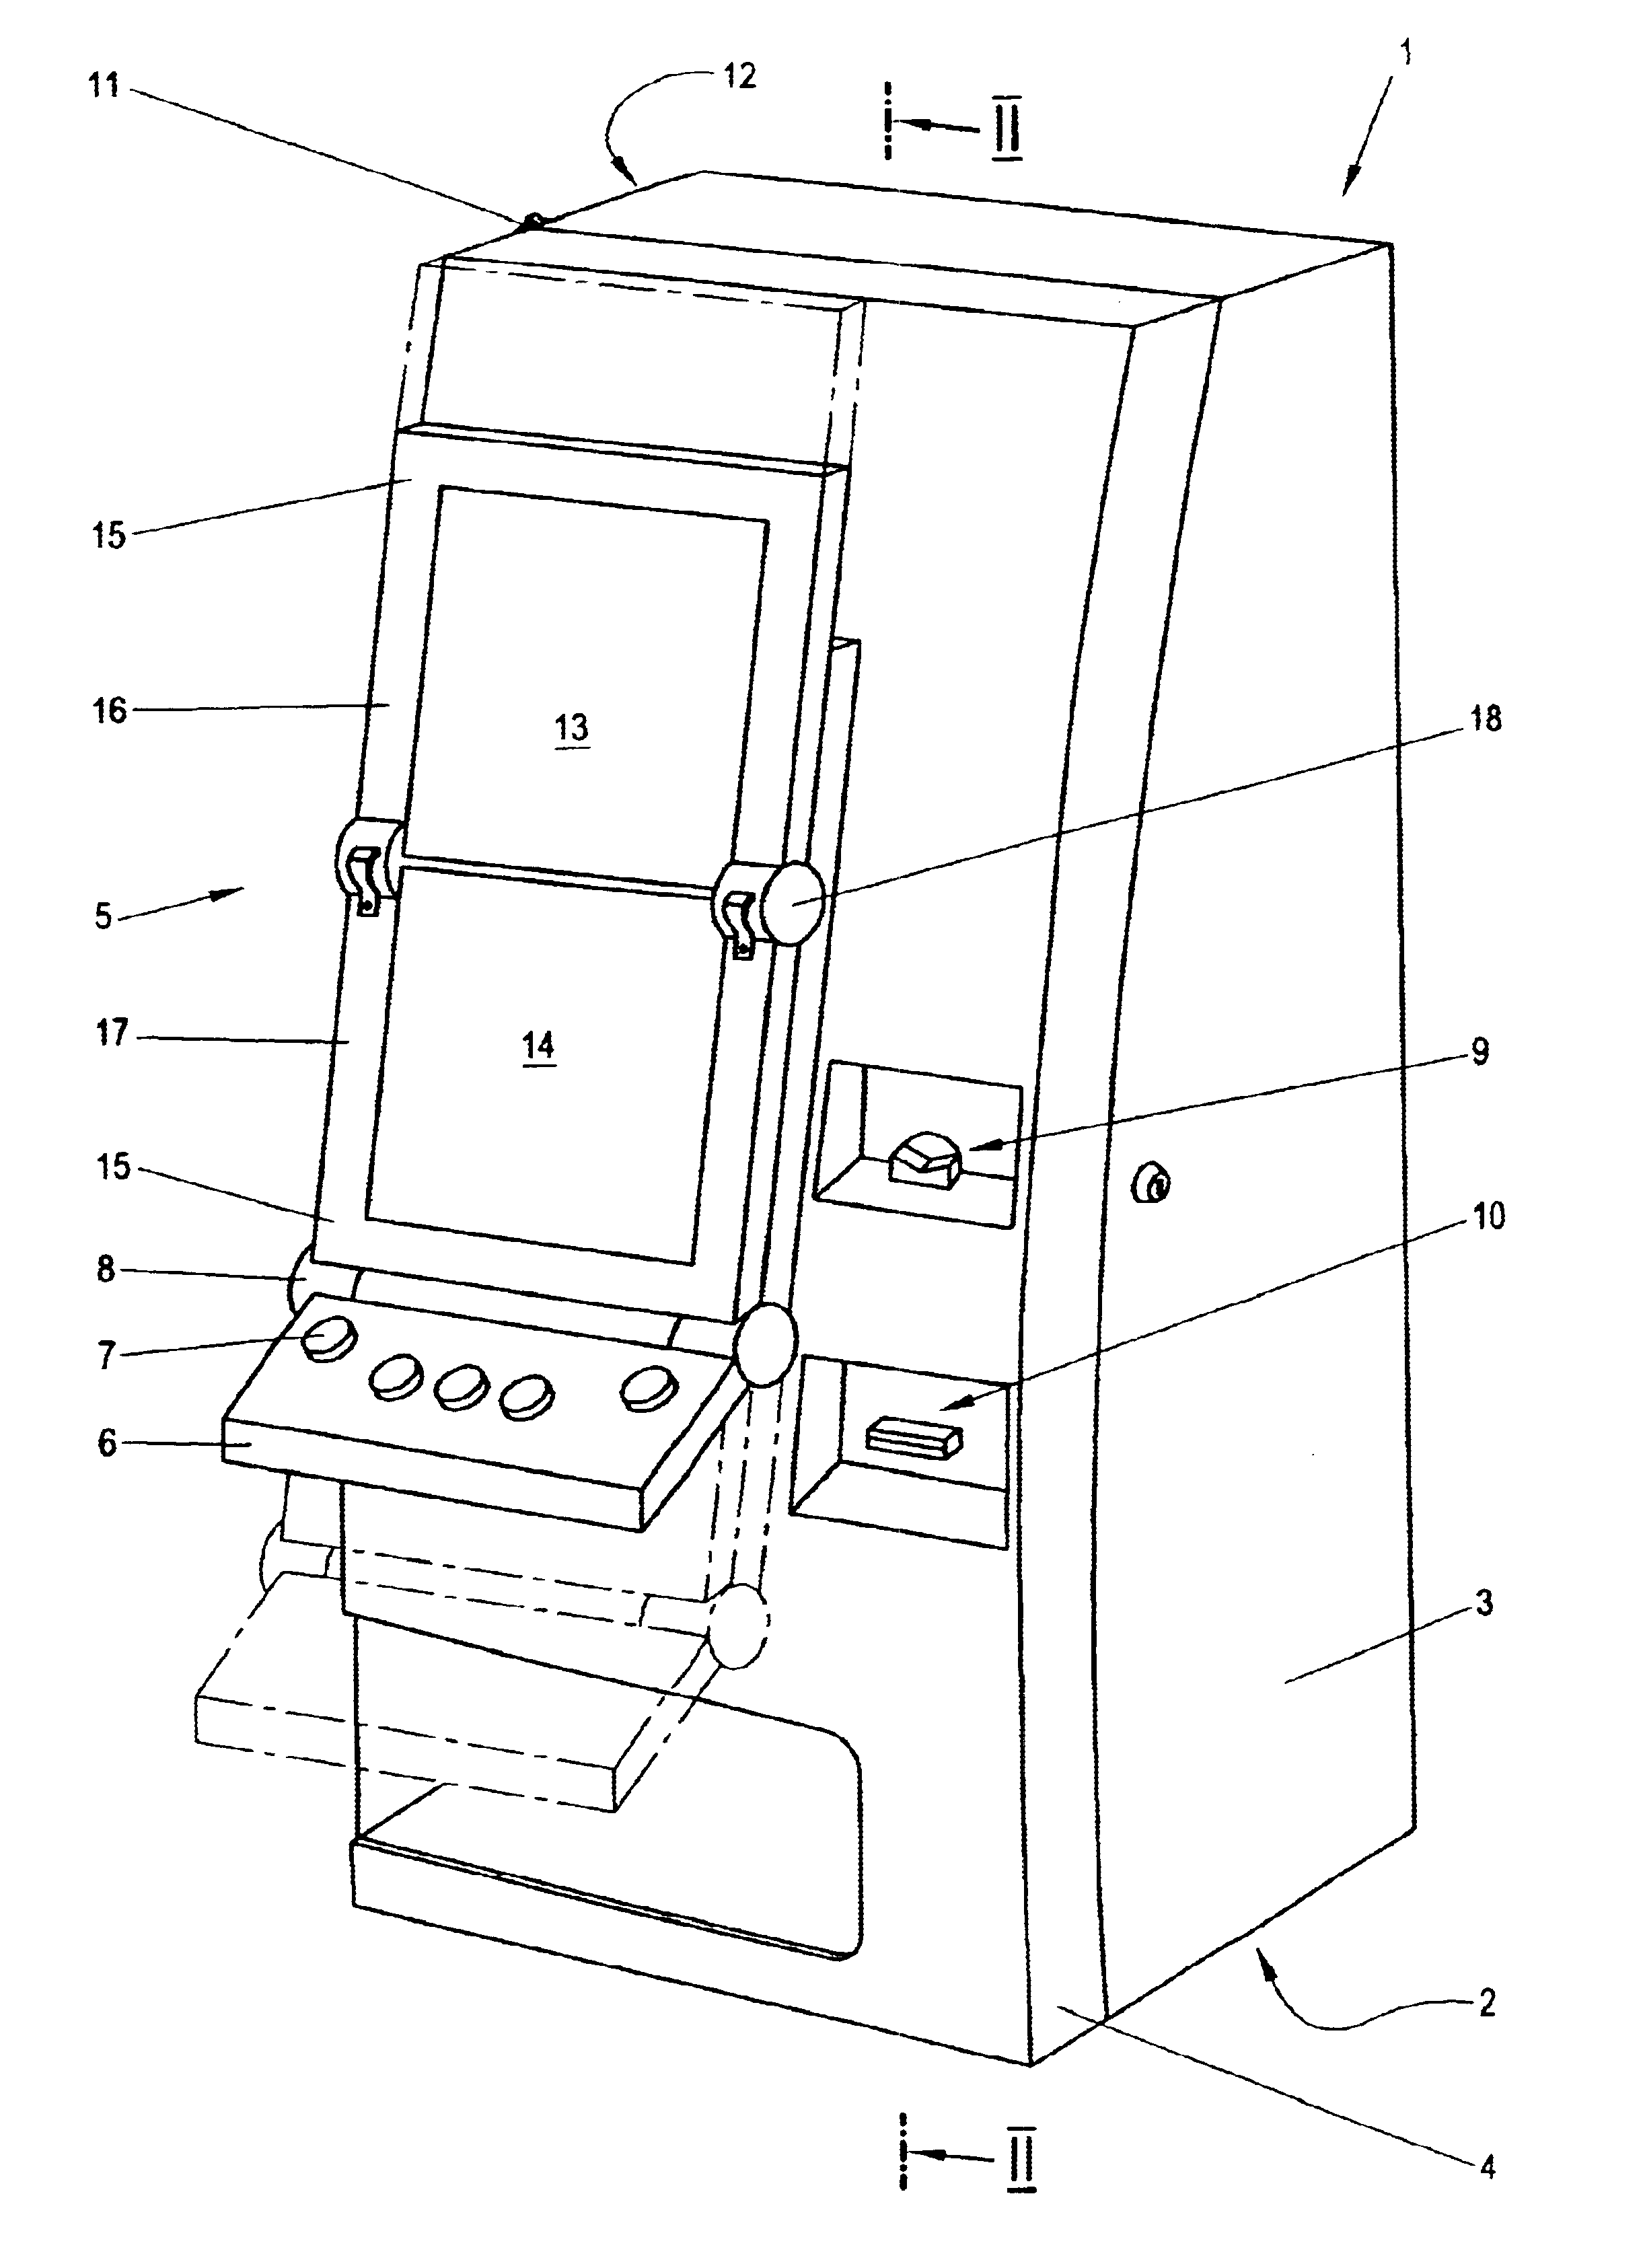 Apparatus for positioning a symbol display device onto a door element of a casing of a coin operated entertainment automat